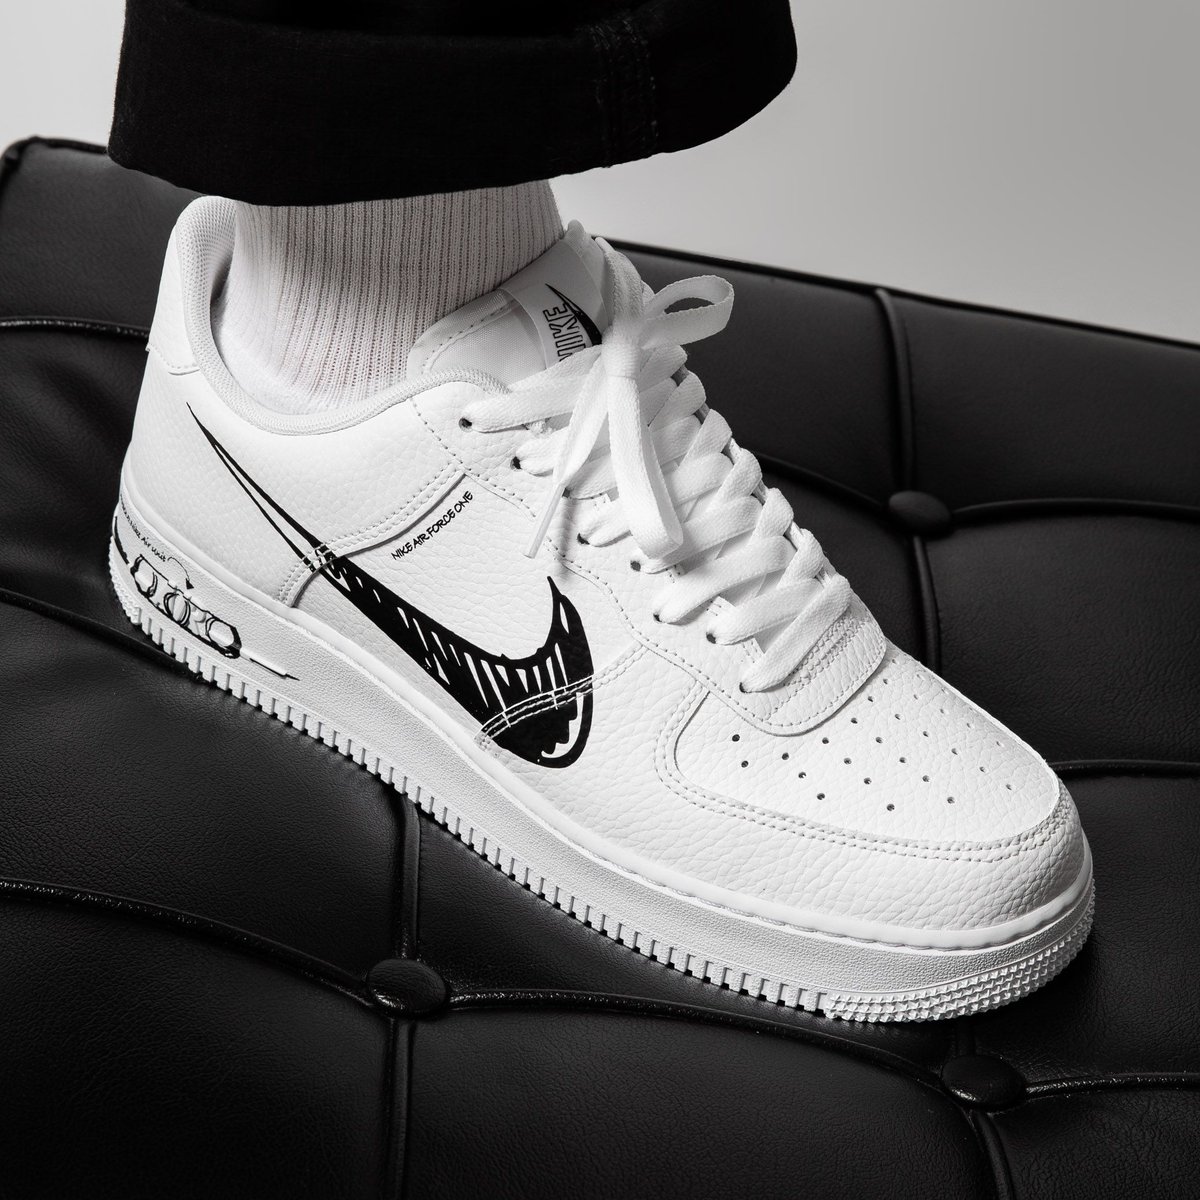 Titolo Shop - Nike Air Force 1 LV8 Utility in Team